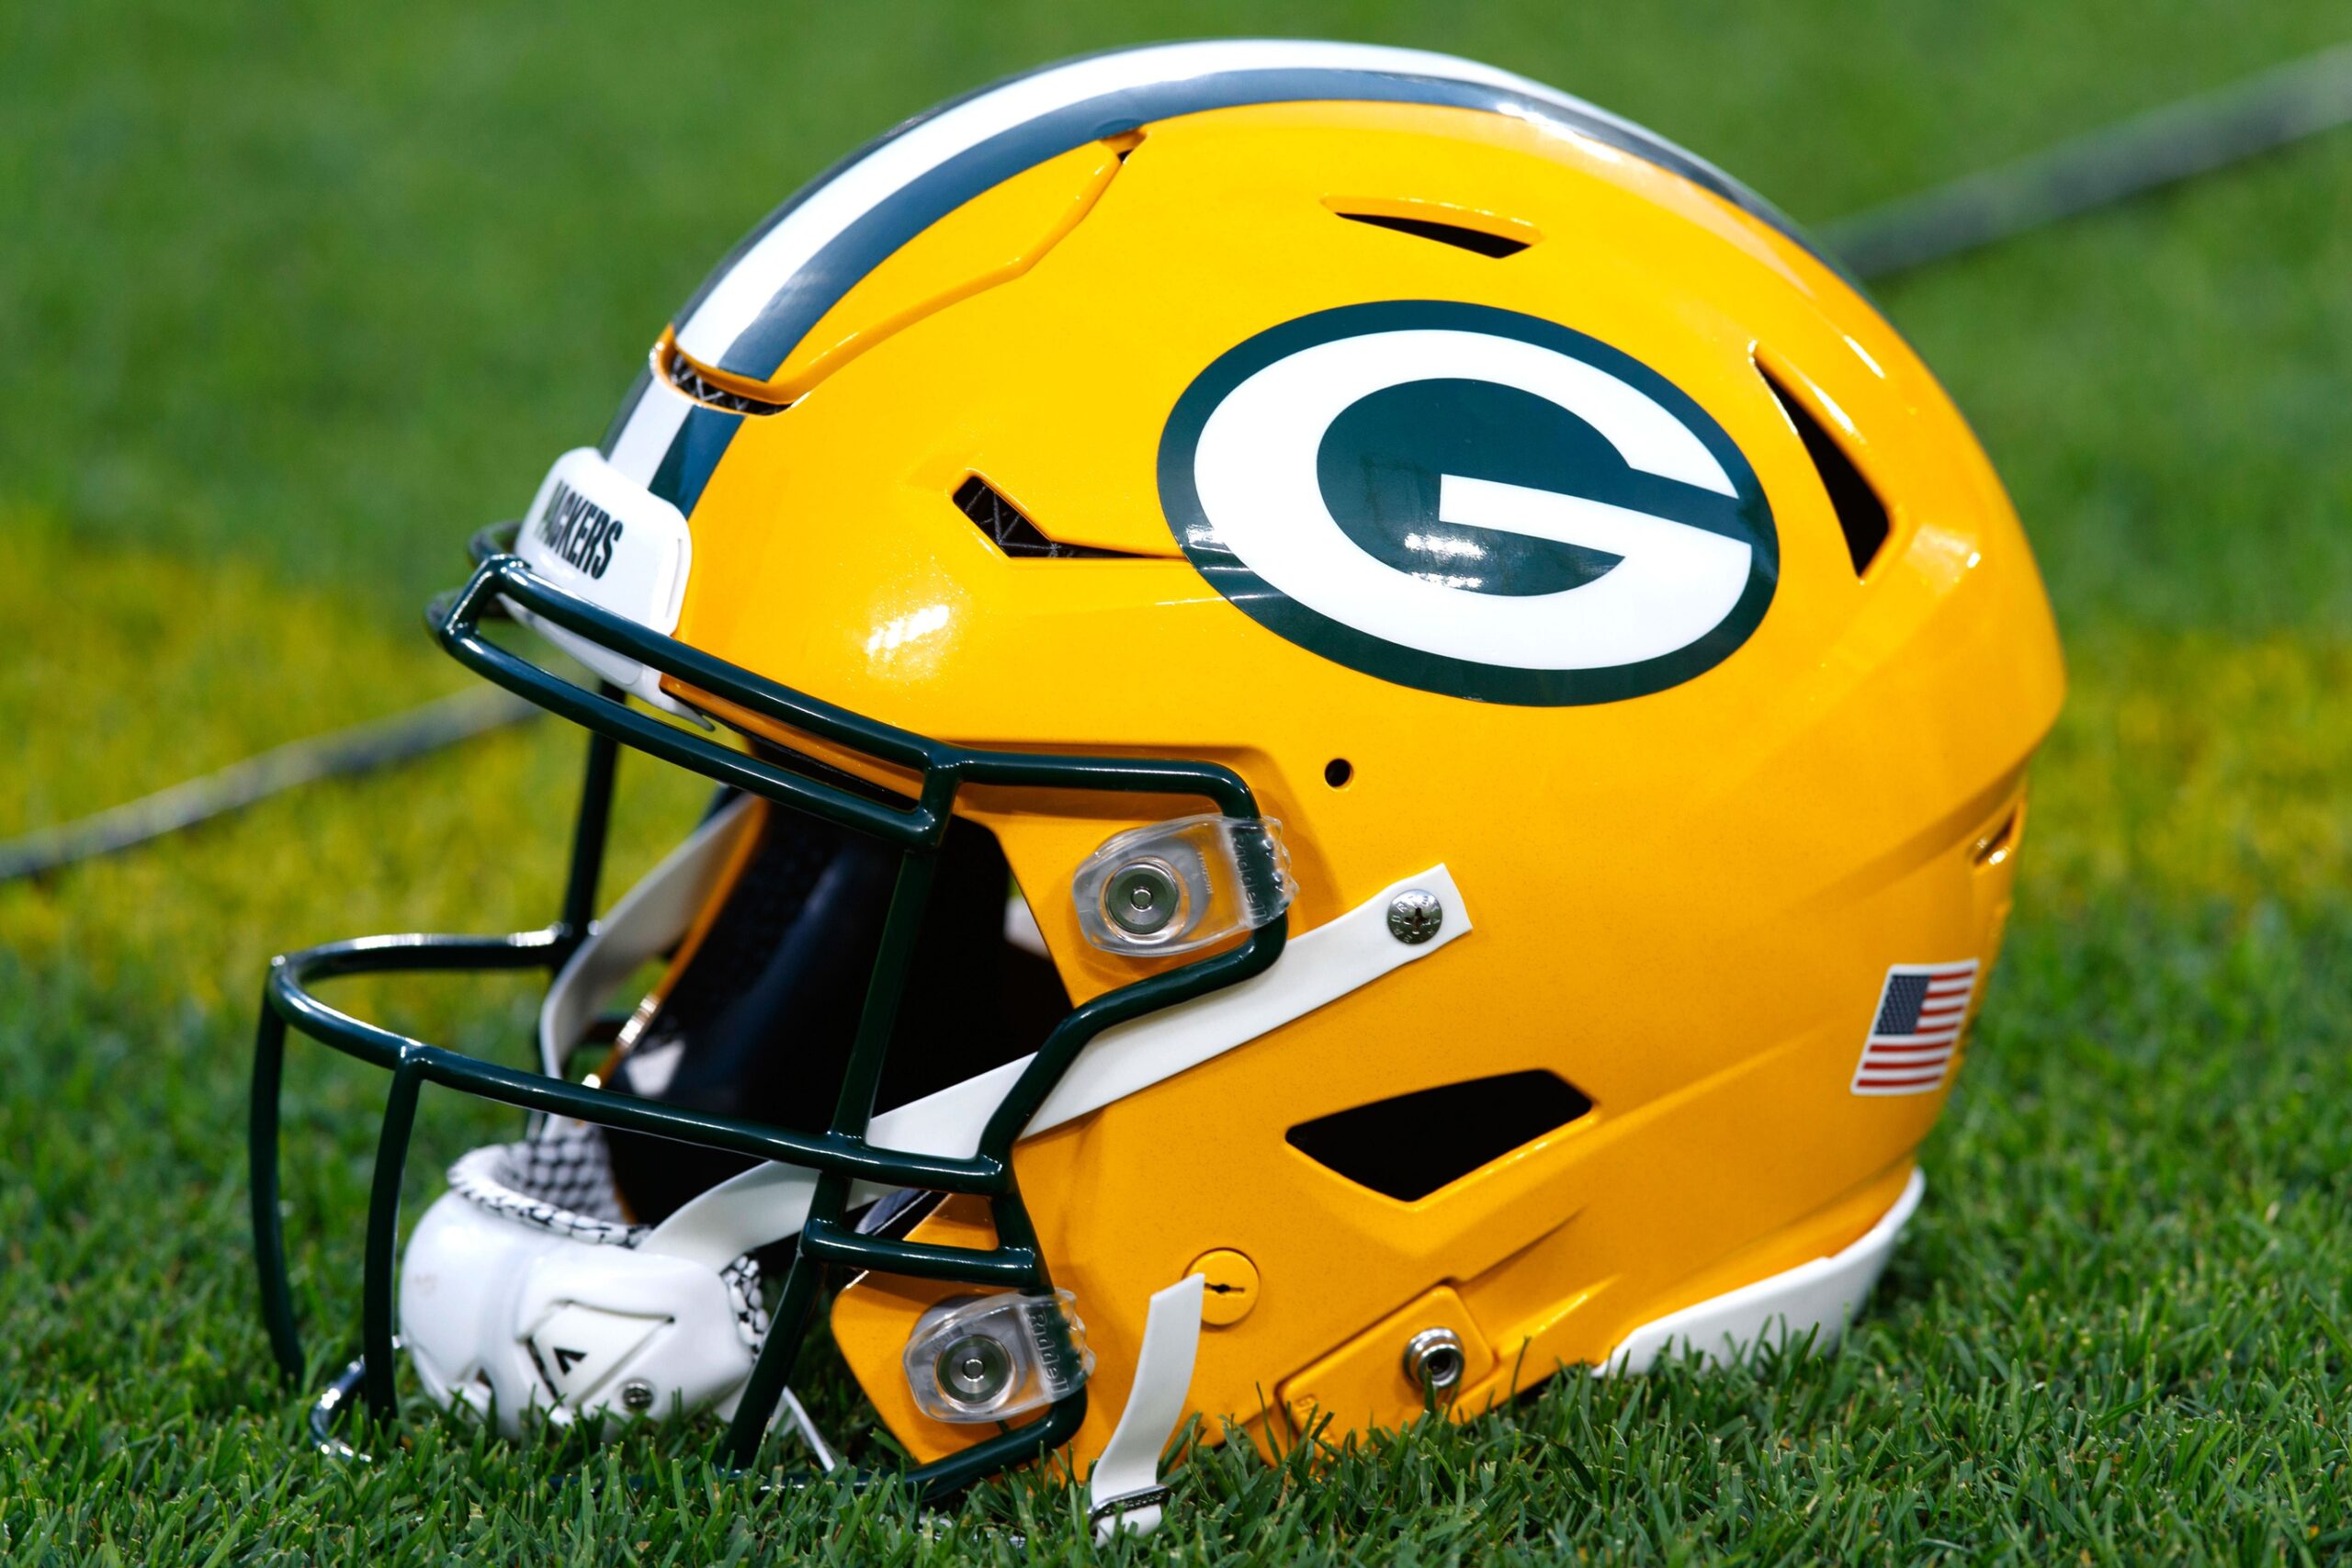 green bay packers nfc